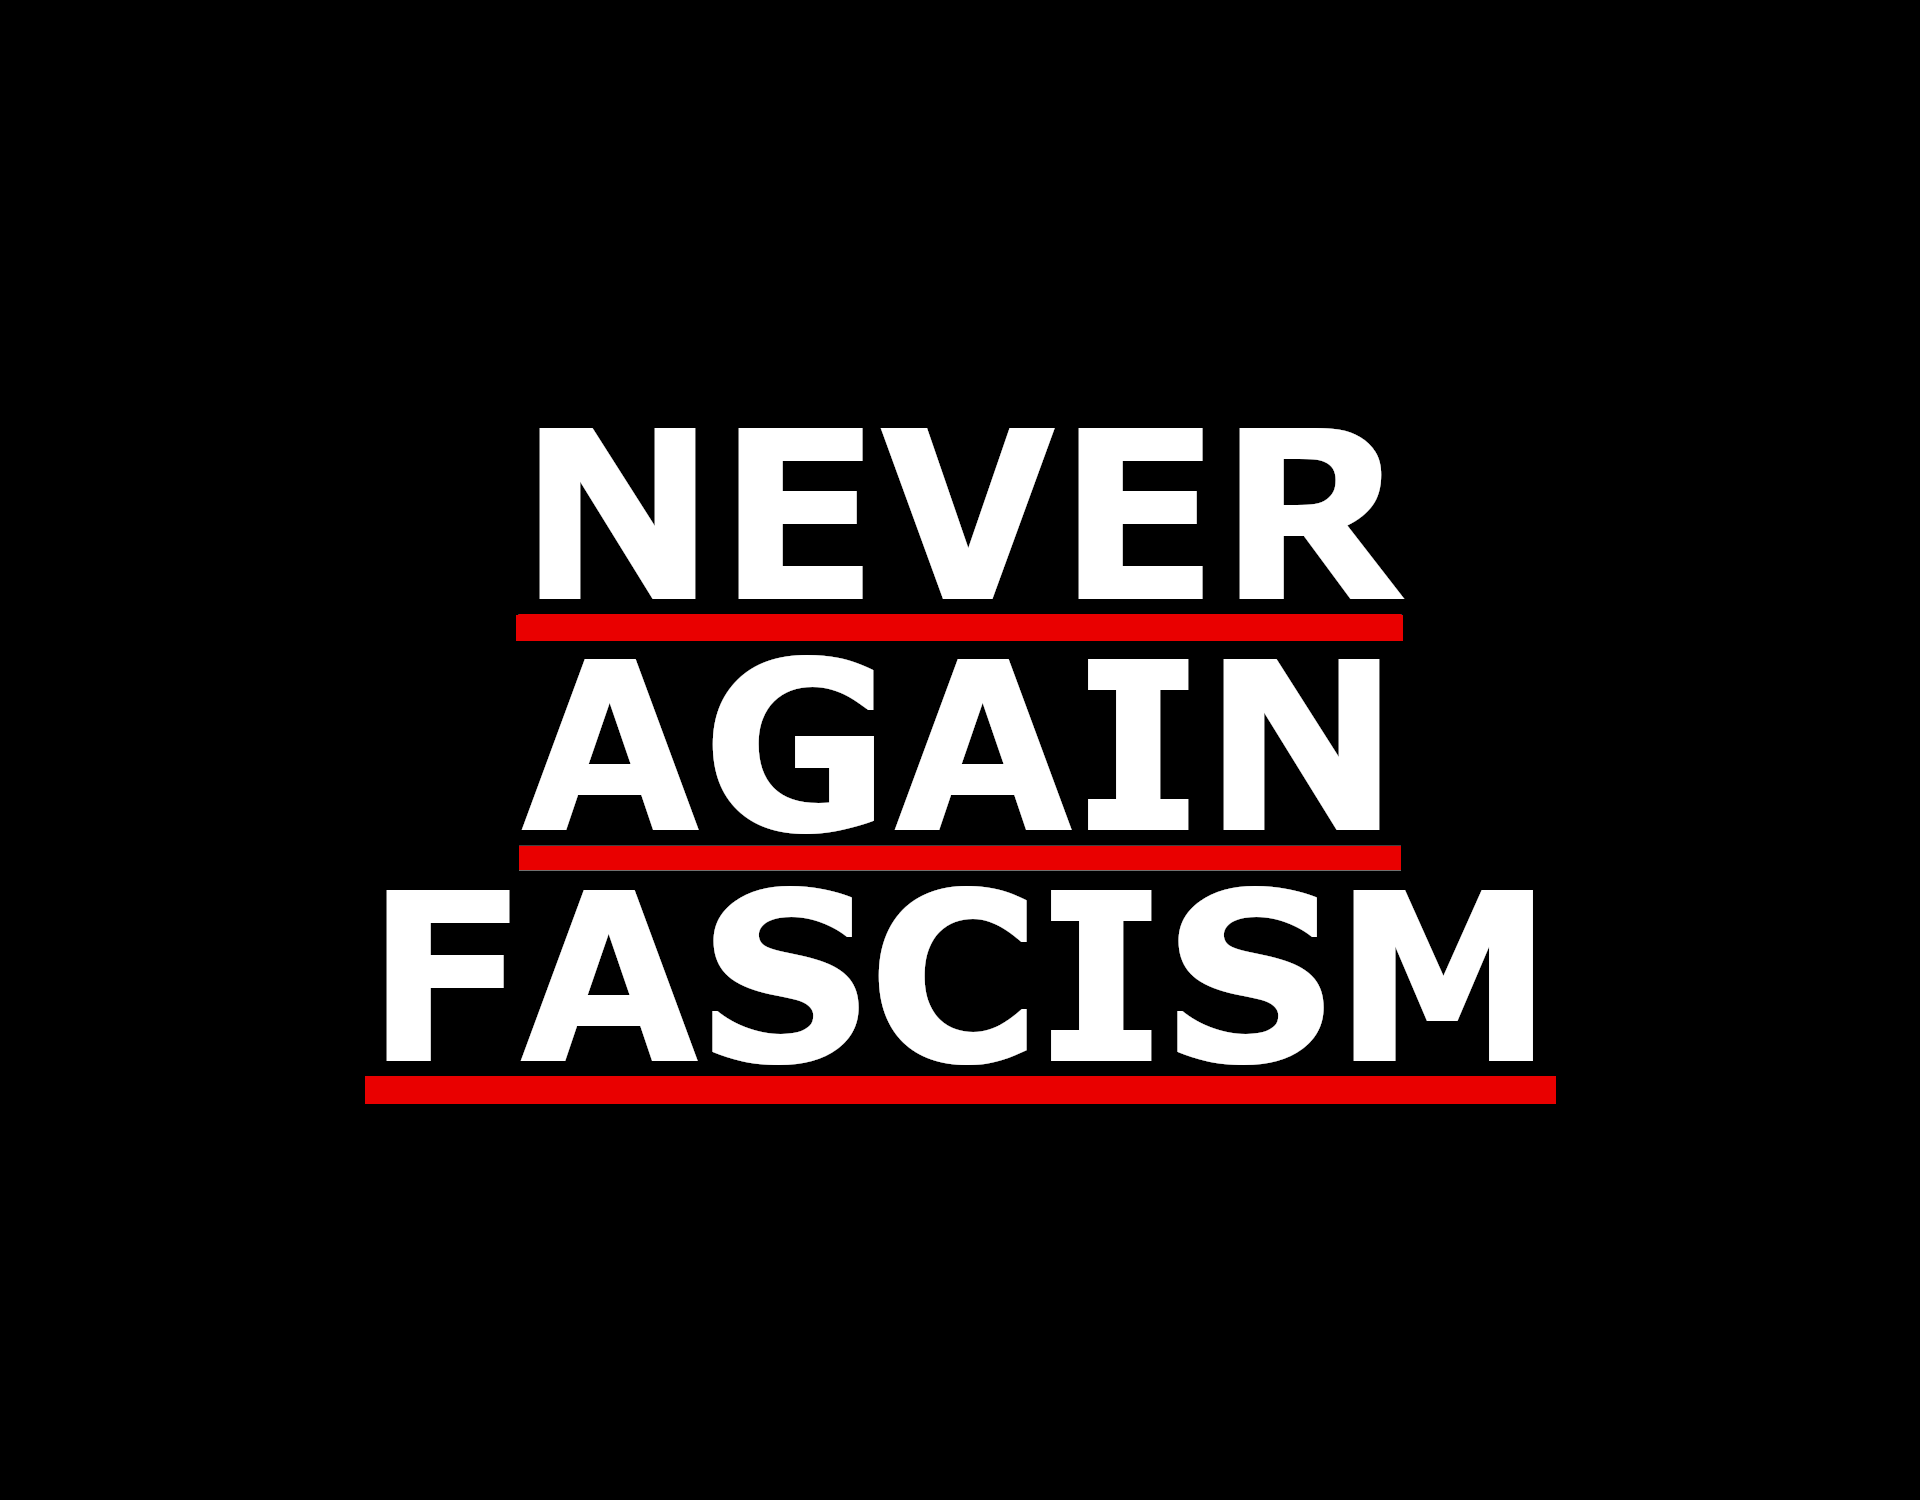 White letters with red underlining on a black background. In all caps, it says 'Never again fascism'.